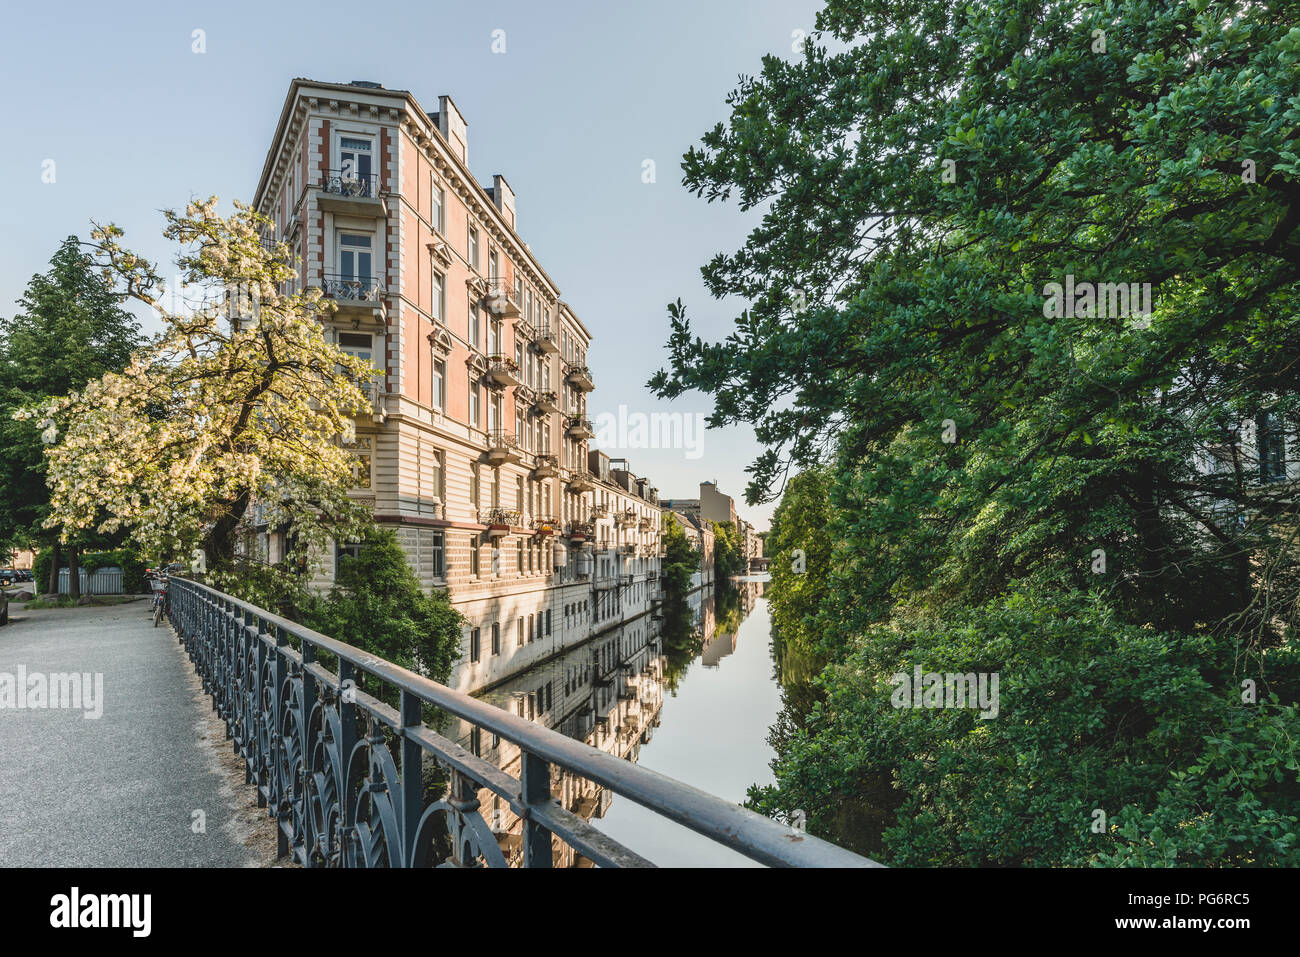 Germany, Hamburg, Eppendorf, residential buildings at Isebek canal Stock Photo